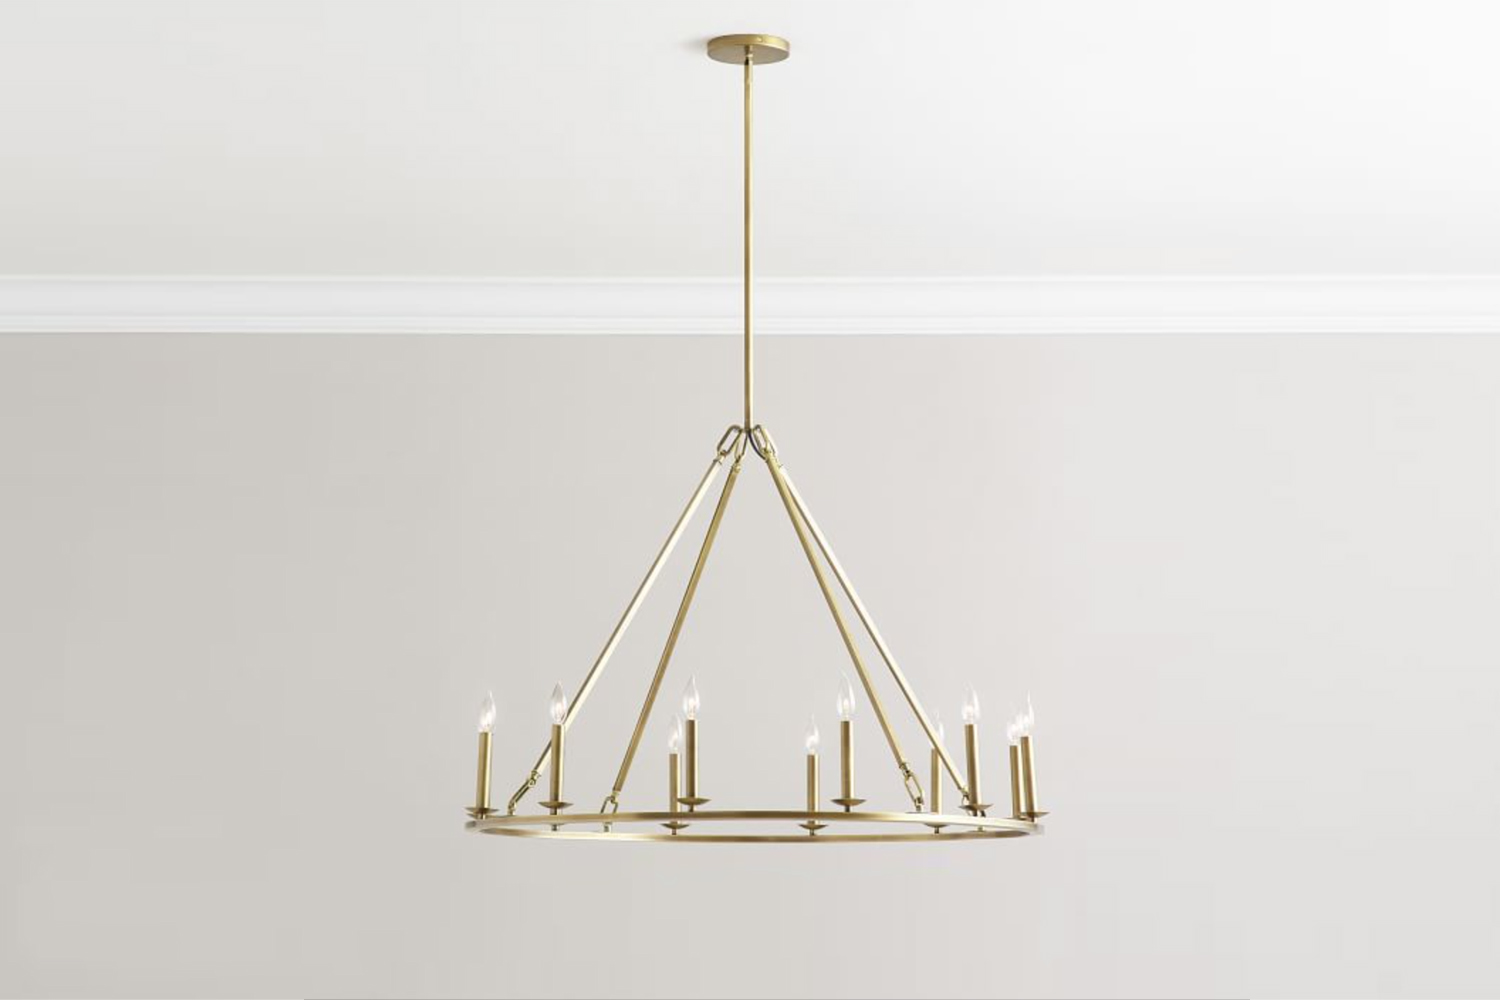 the remington iron round chandelier comes in brass (shown) or bronze for $600  16